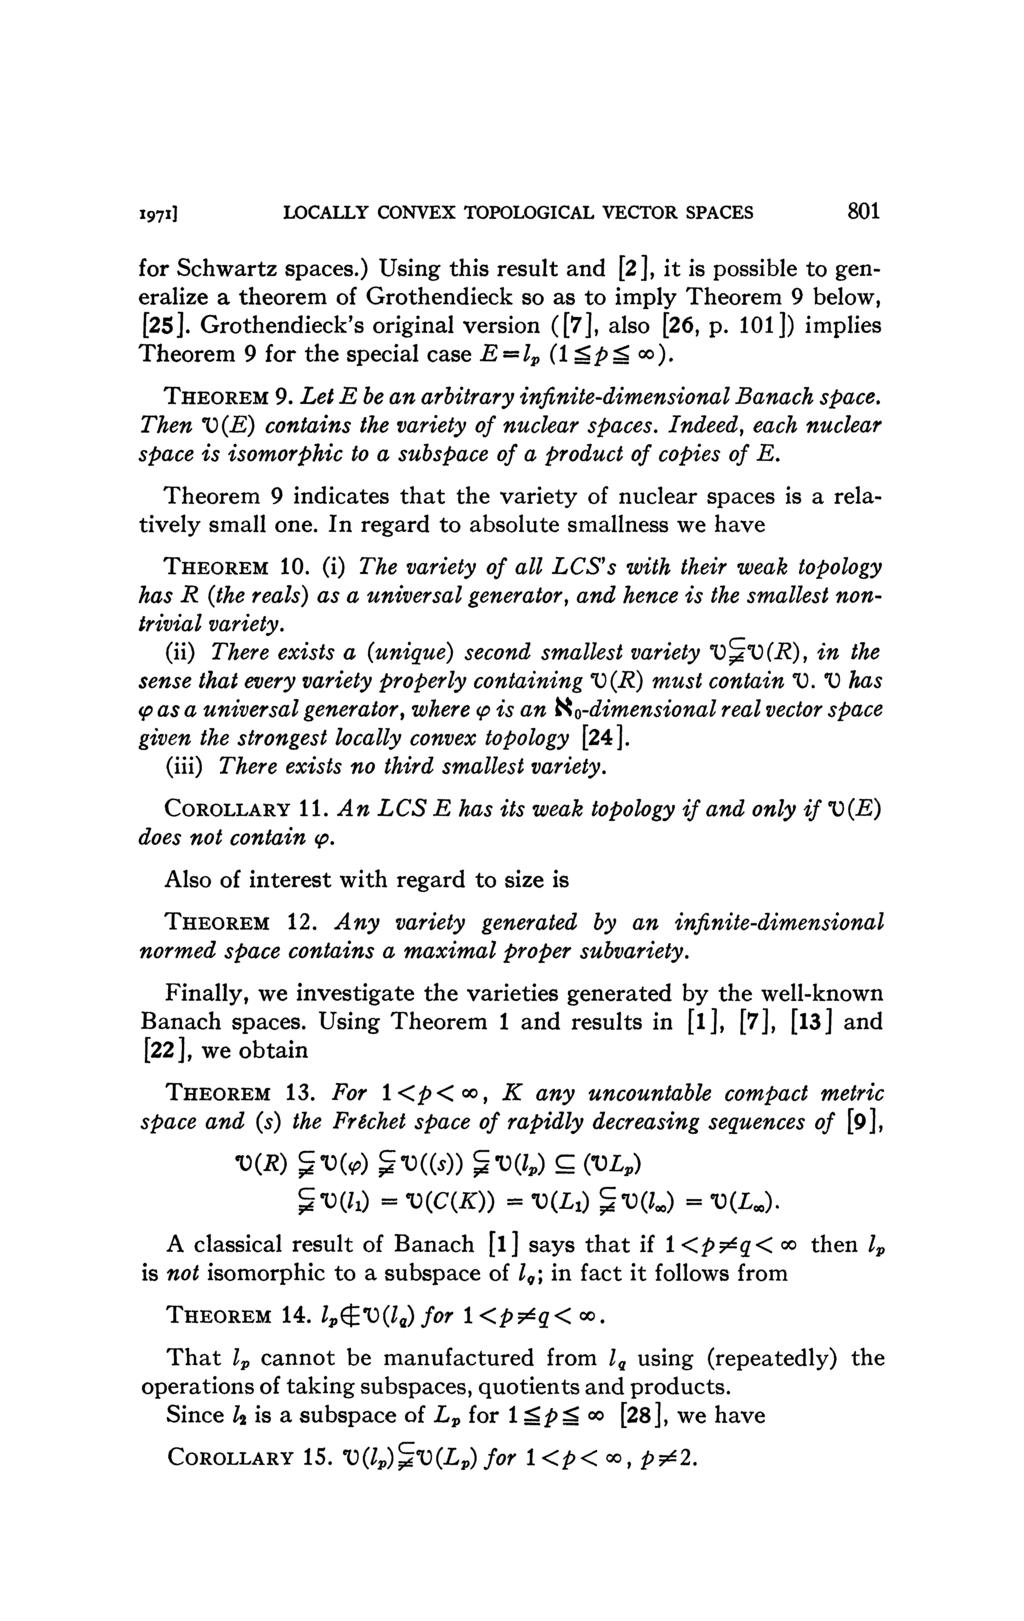 I97i] LOCALLY CONVEX TOPOLOGICAL VECTOR SPACES 801 for Schwartz spaces.) Using this result and [2], it is possible to generalize a theorem of Grothendieck so as to imply Theorem 9 below, [25].